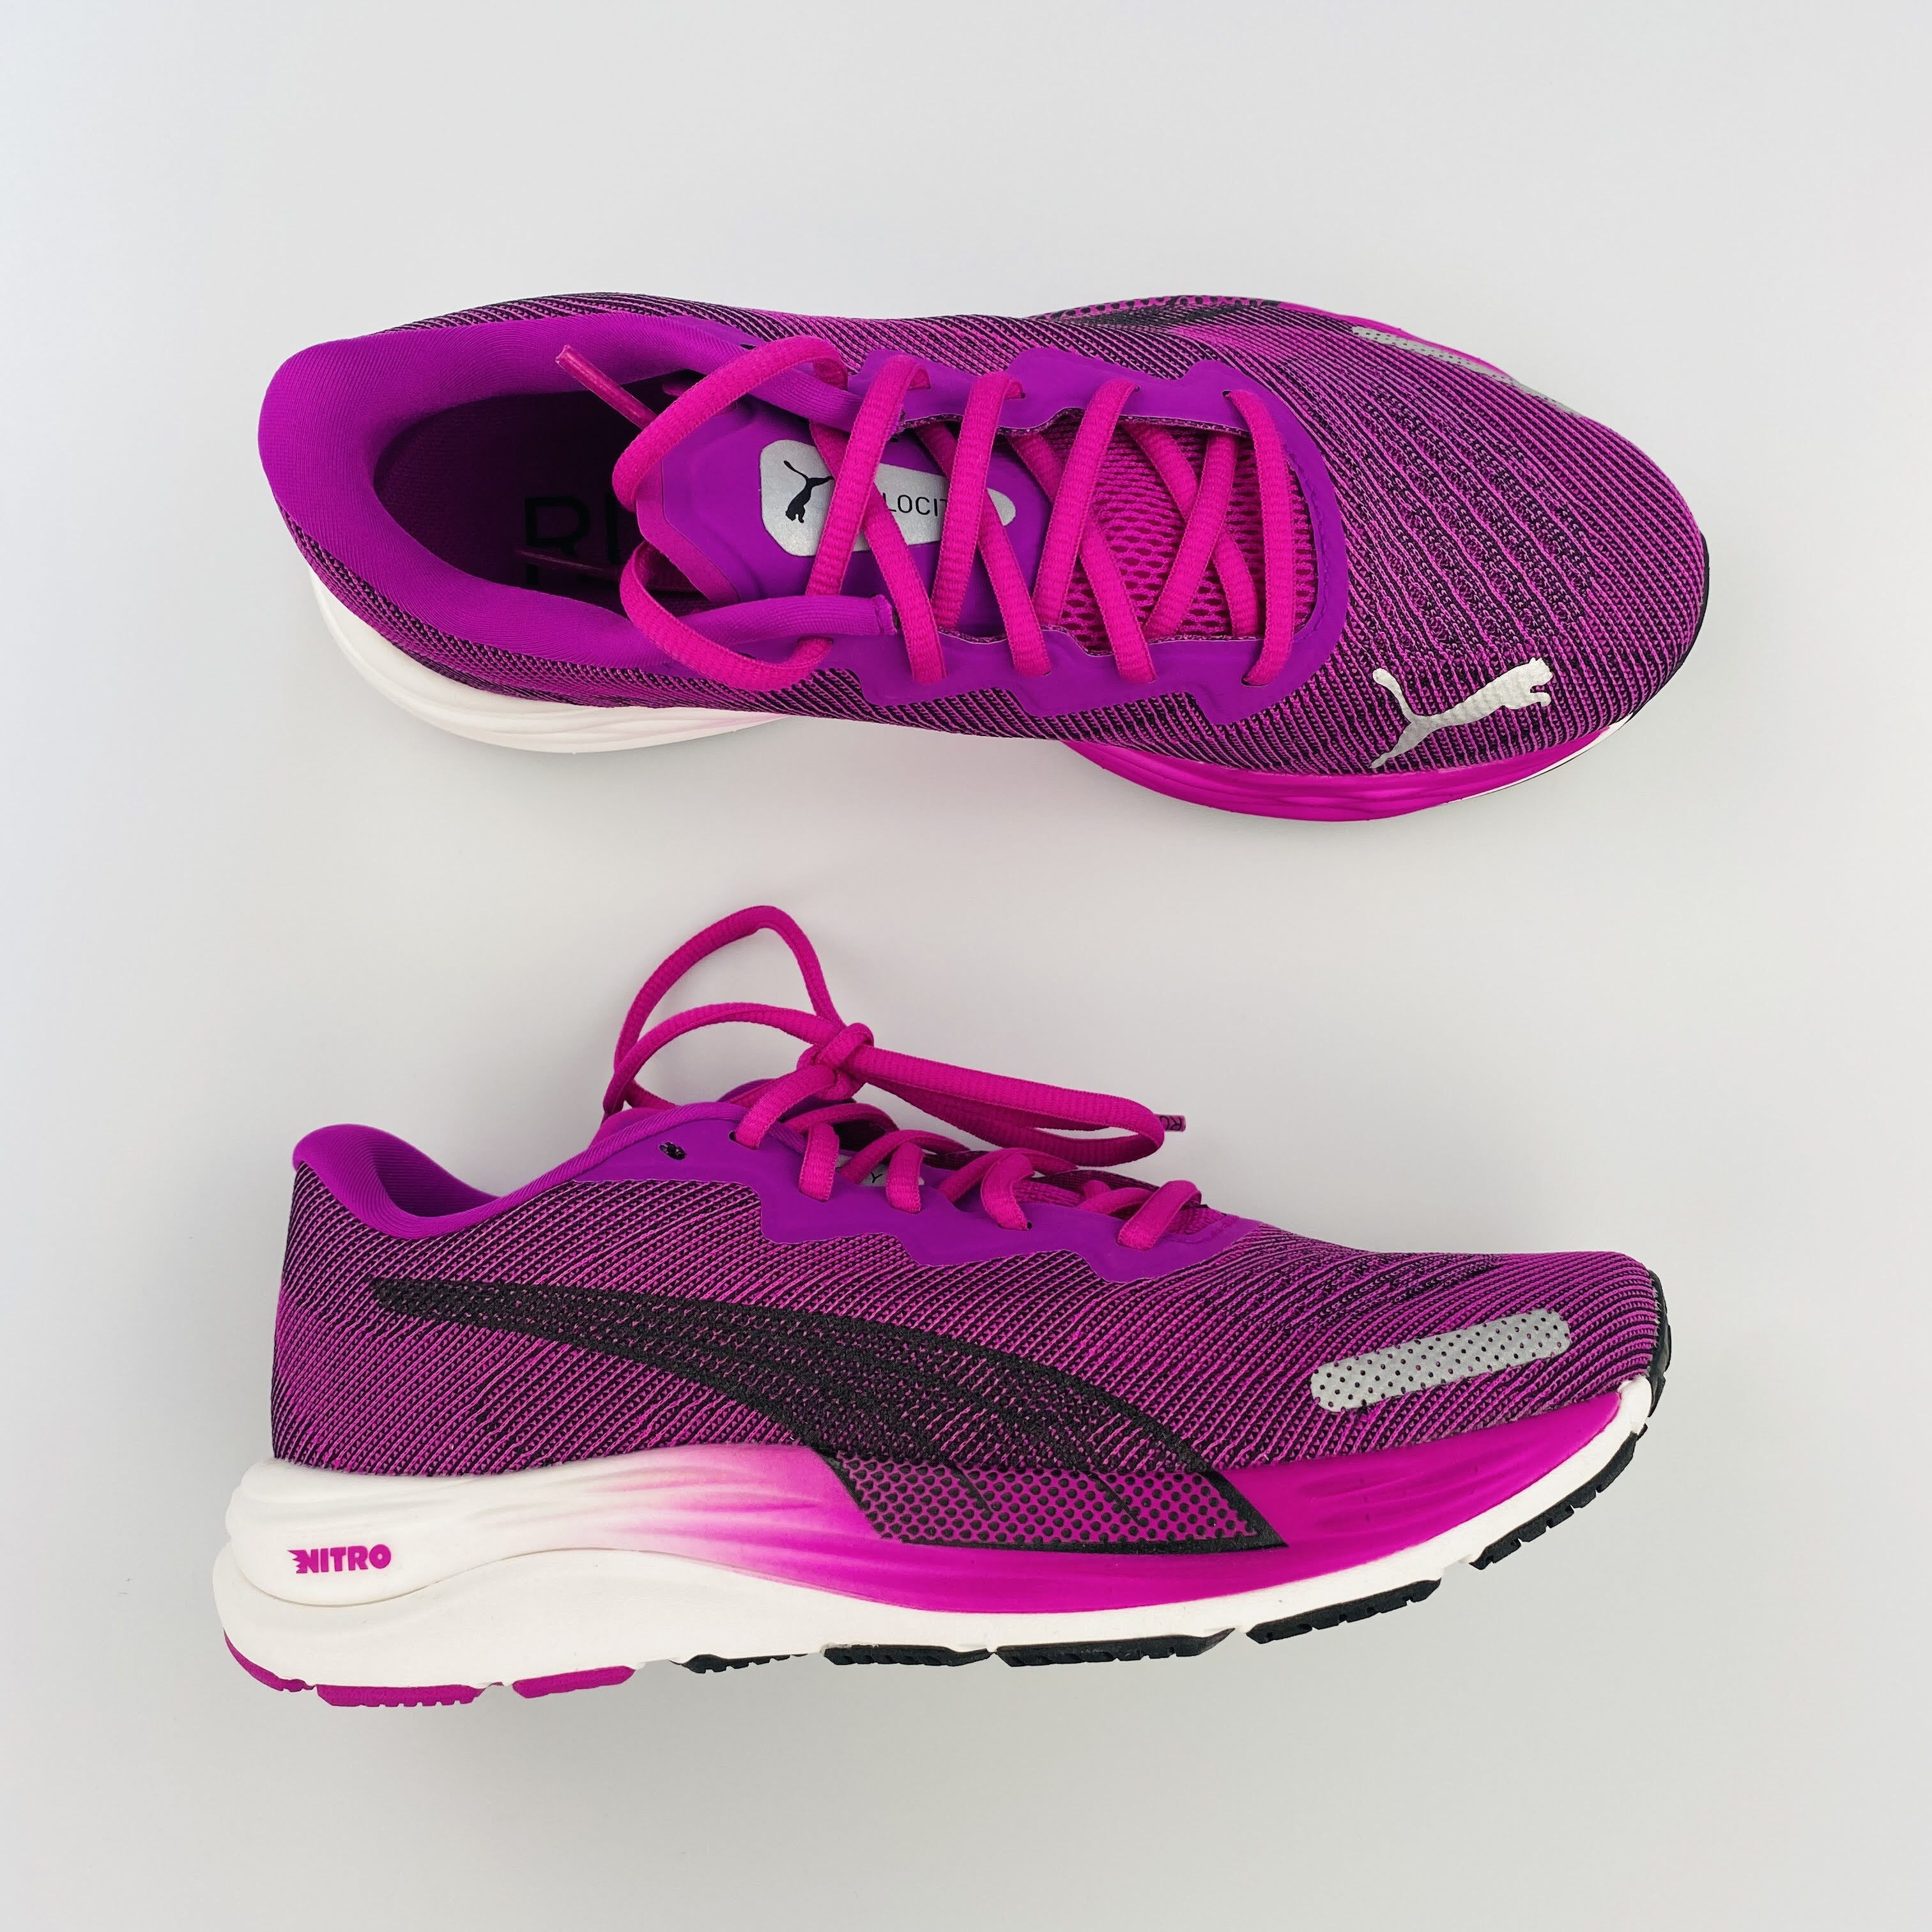 Velocity Nitro 2 Wns - Seconde main Chaussures running femme - Violet - 38.5